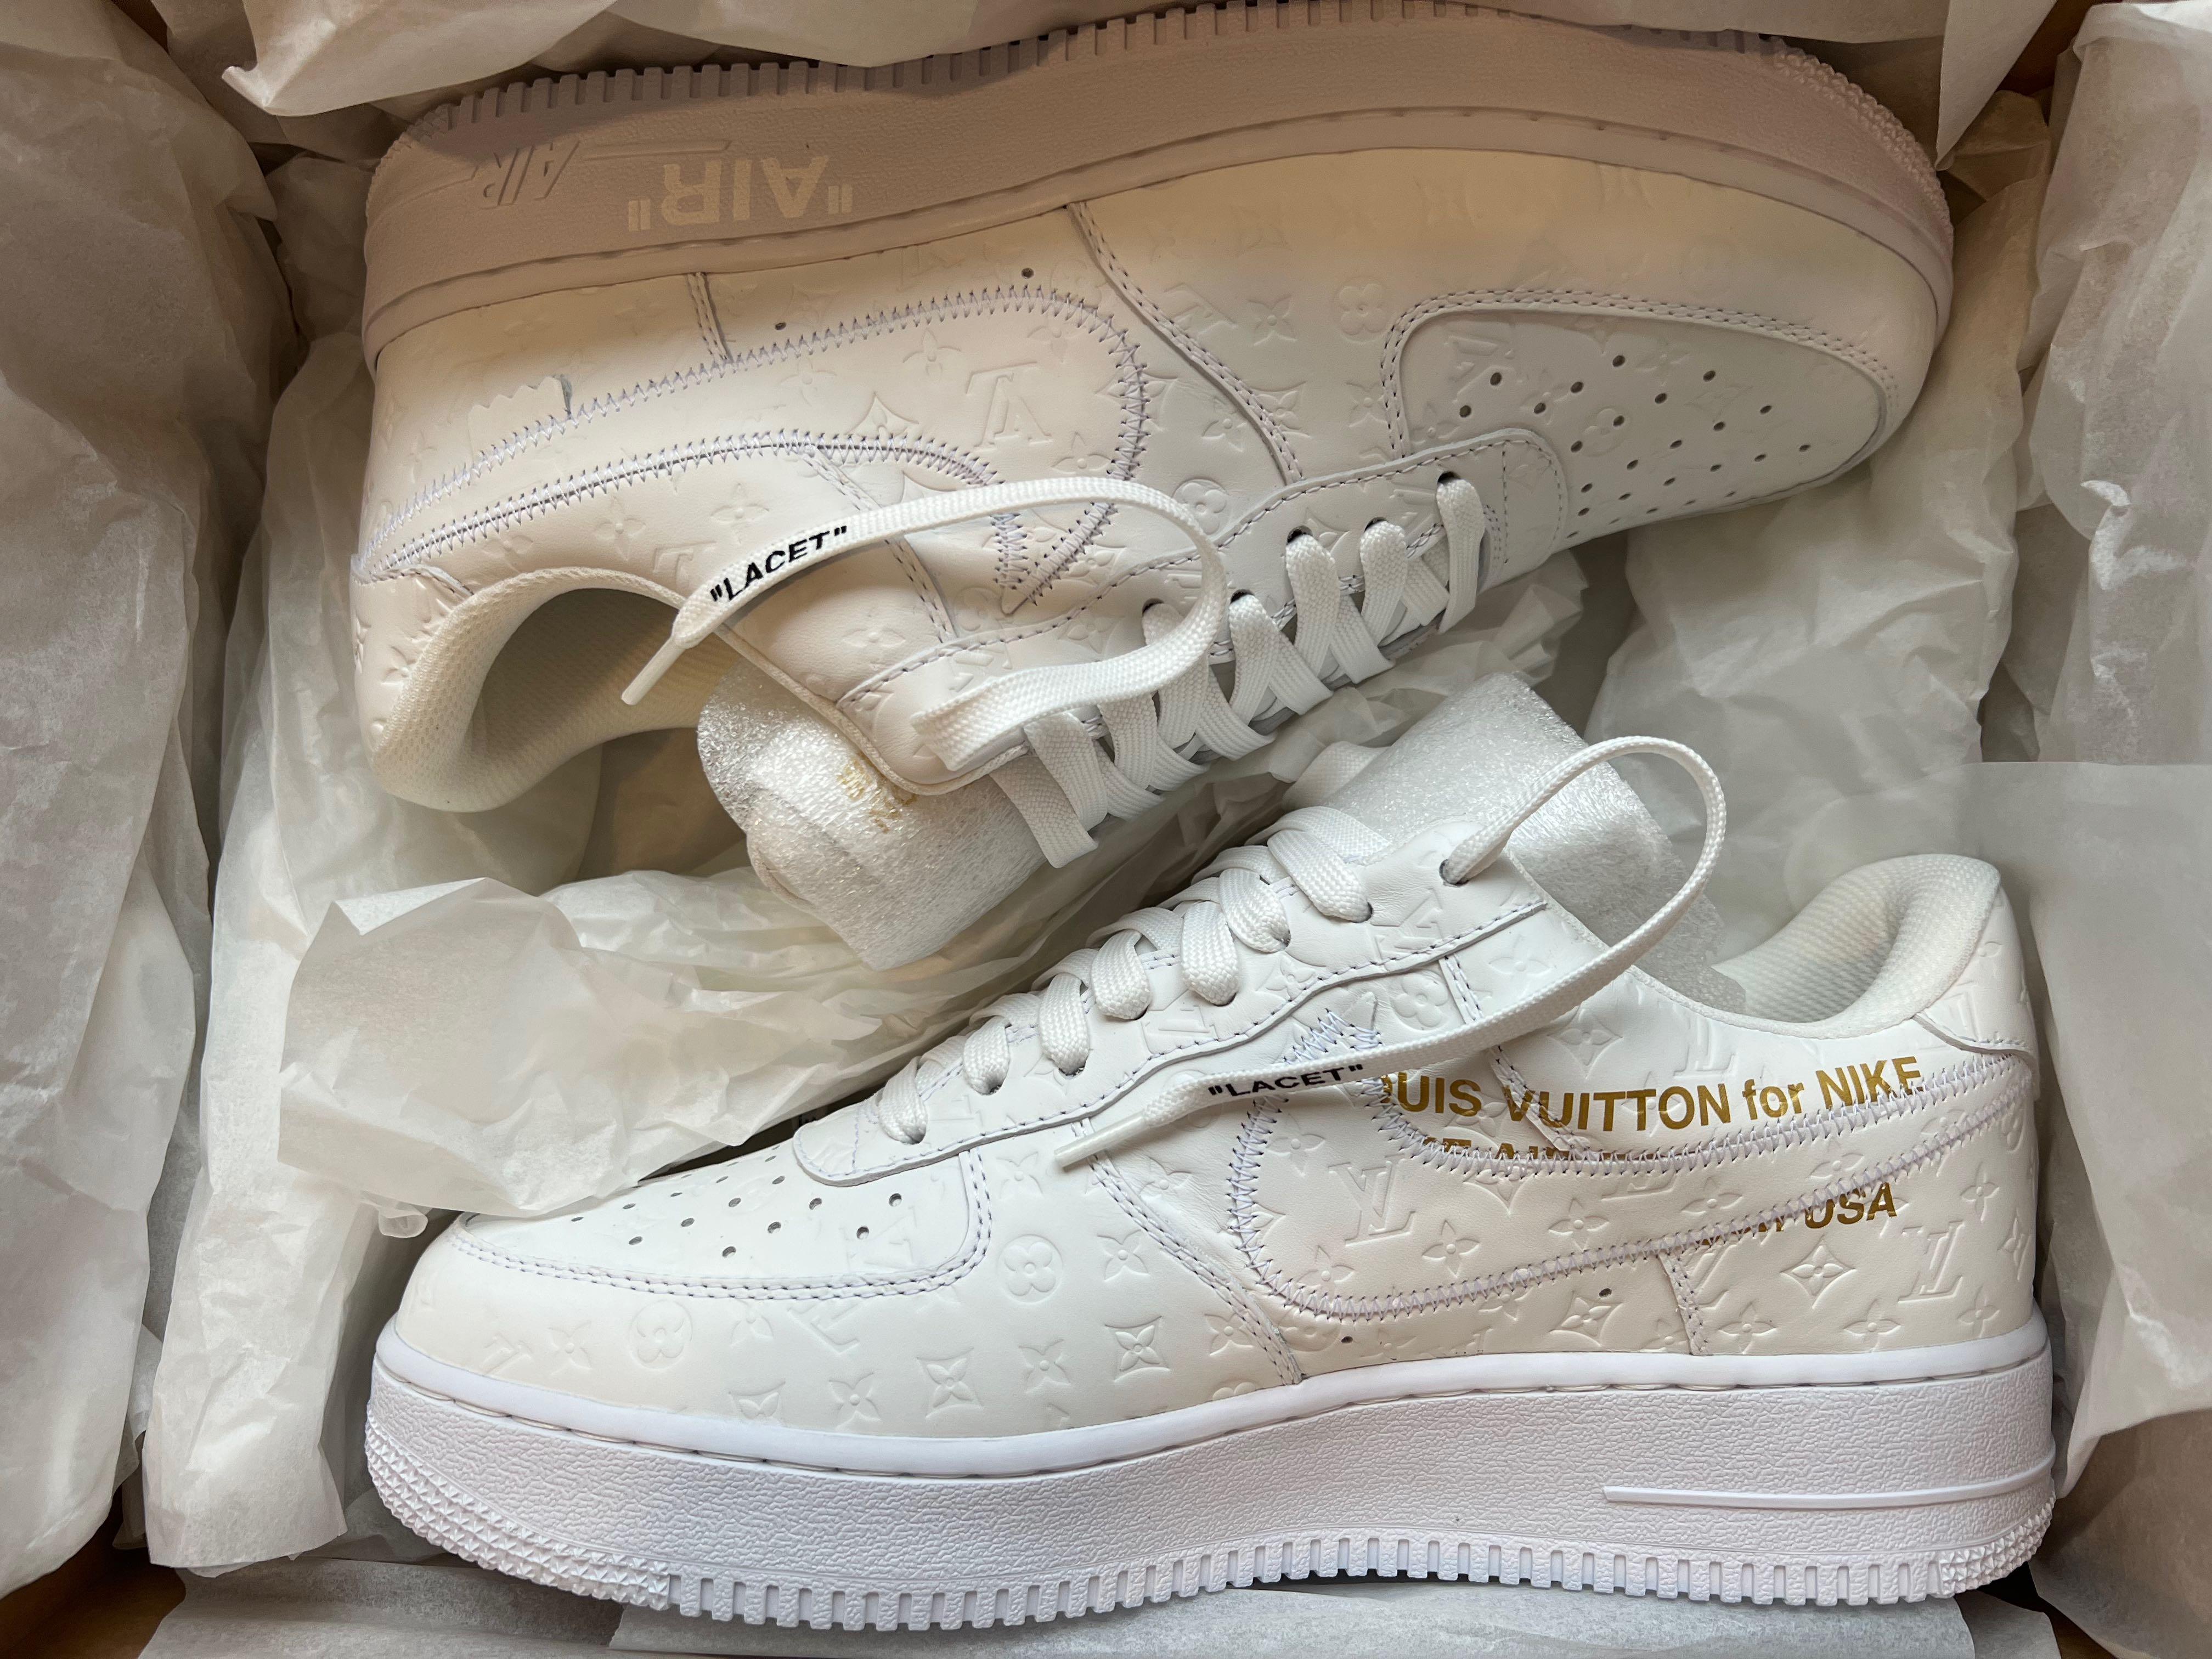 $20,000 Louis Vuitton Nike Air Force 1 White By Virgil Abloh FIRST LOOK 